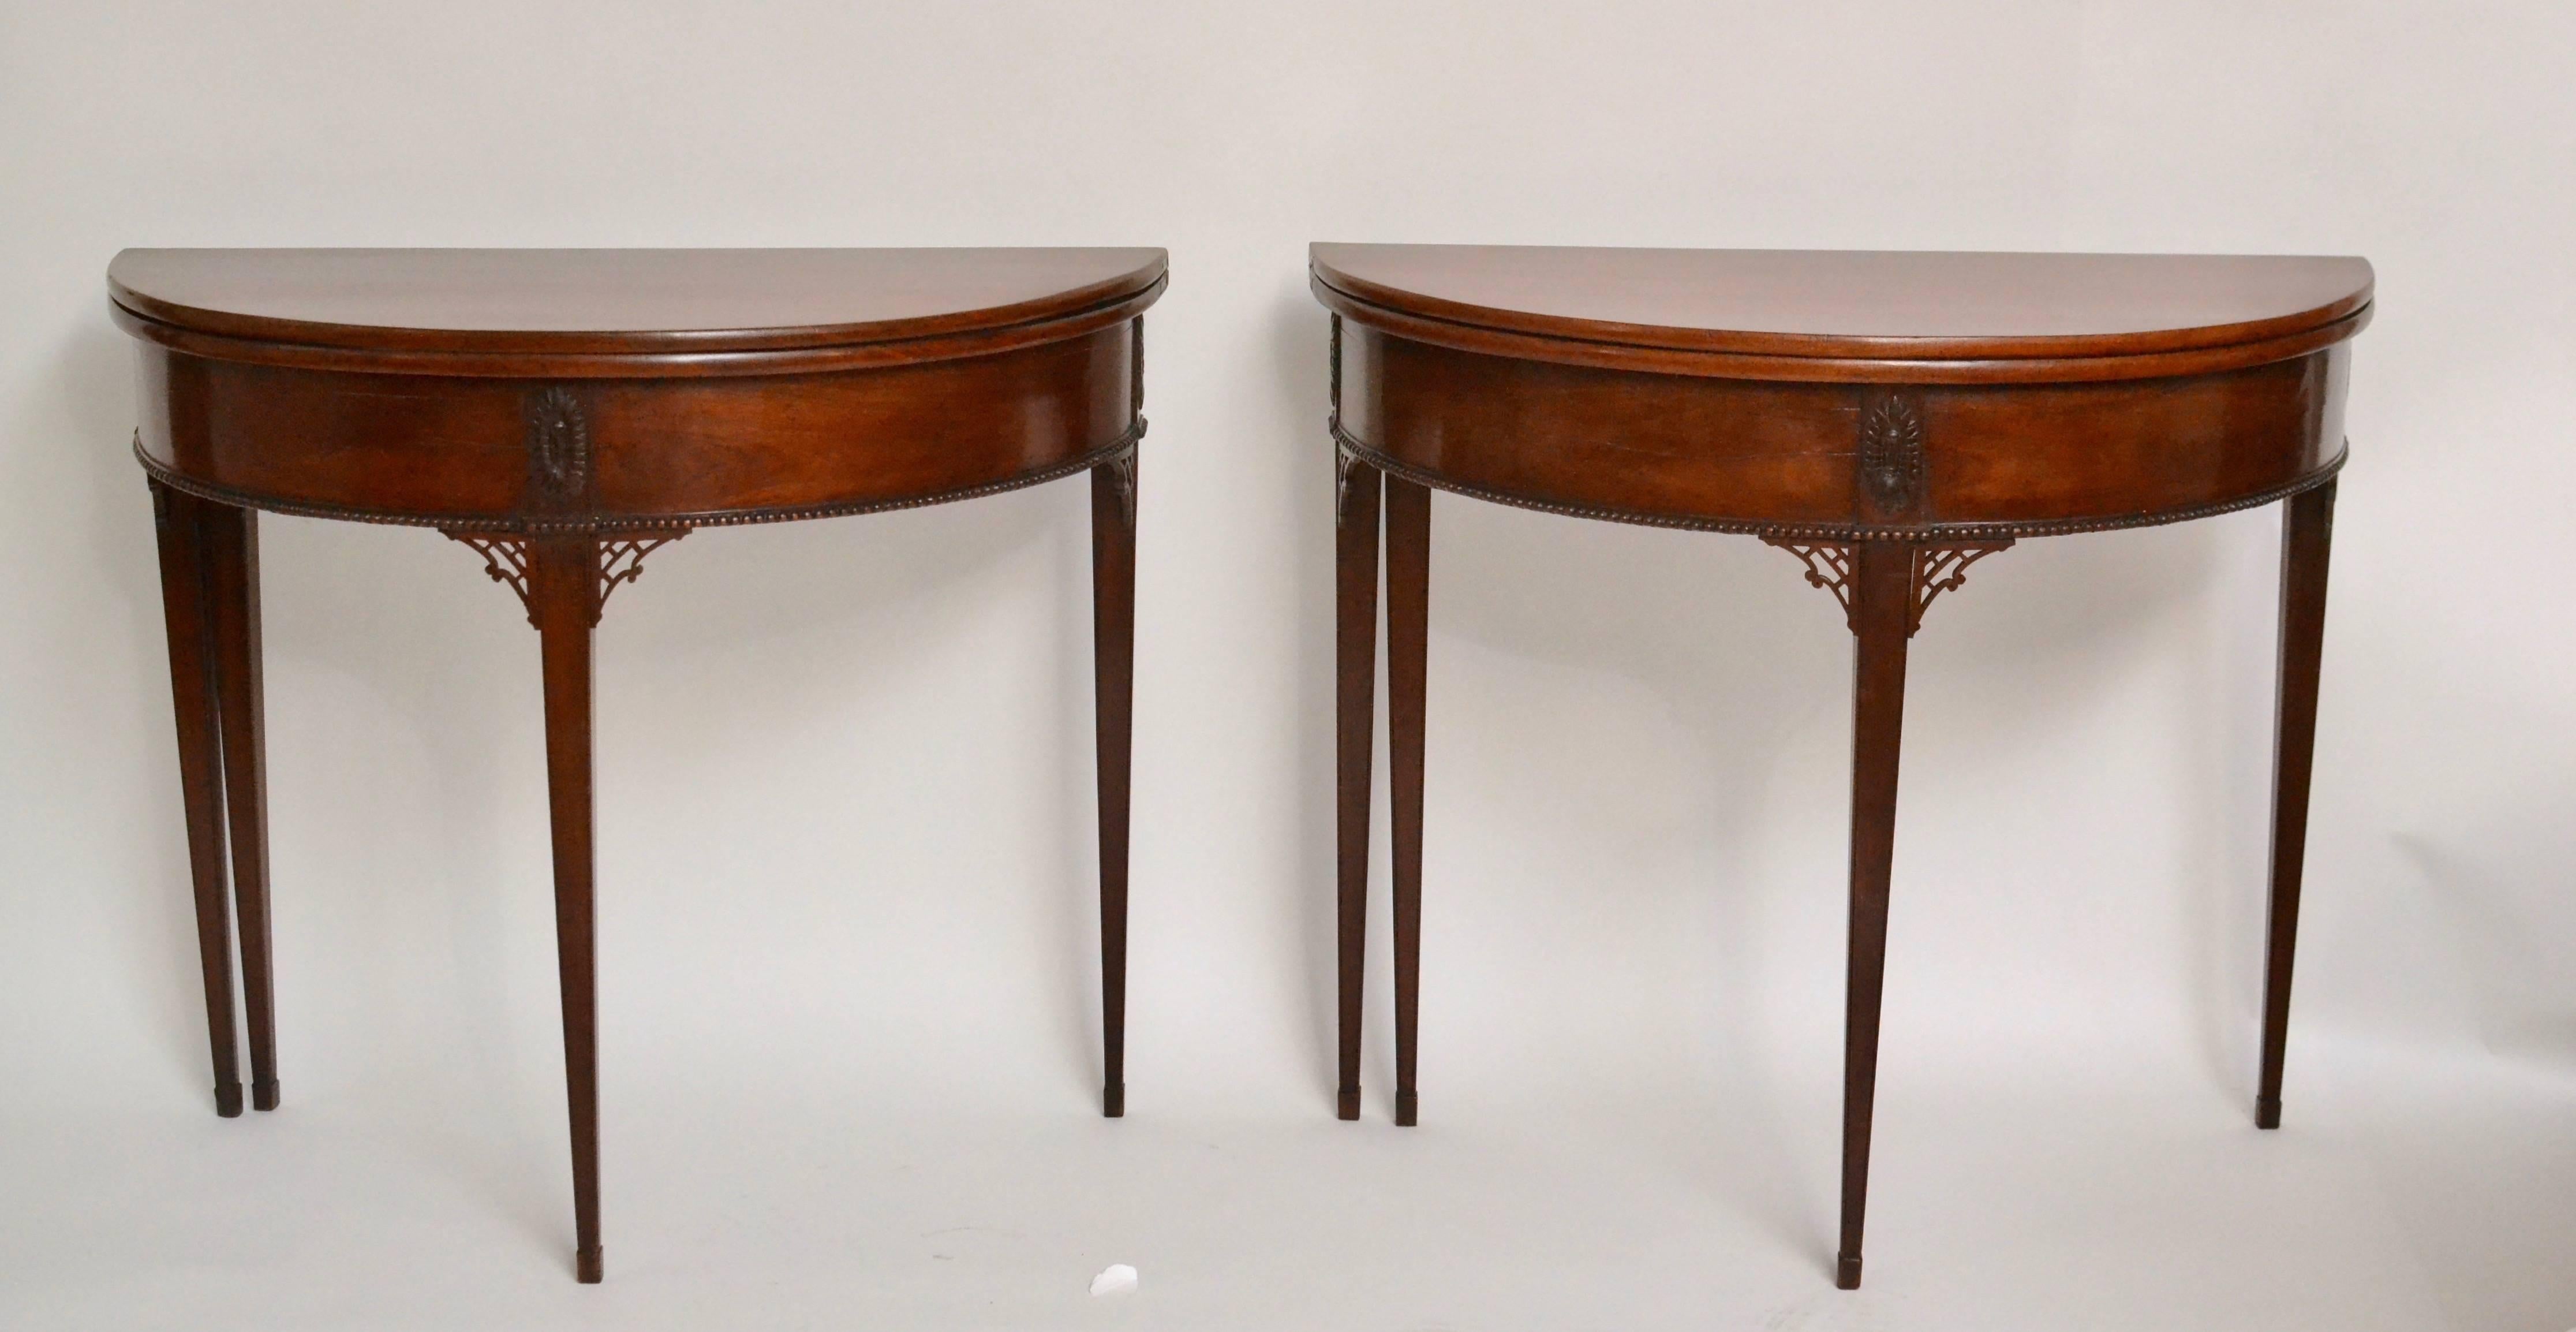 A very nice and rare pair of Gustavian mahogany games tables attributed to Carl Diedrik Fick working in Stockholm (1776-1806).